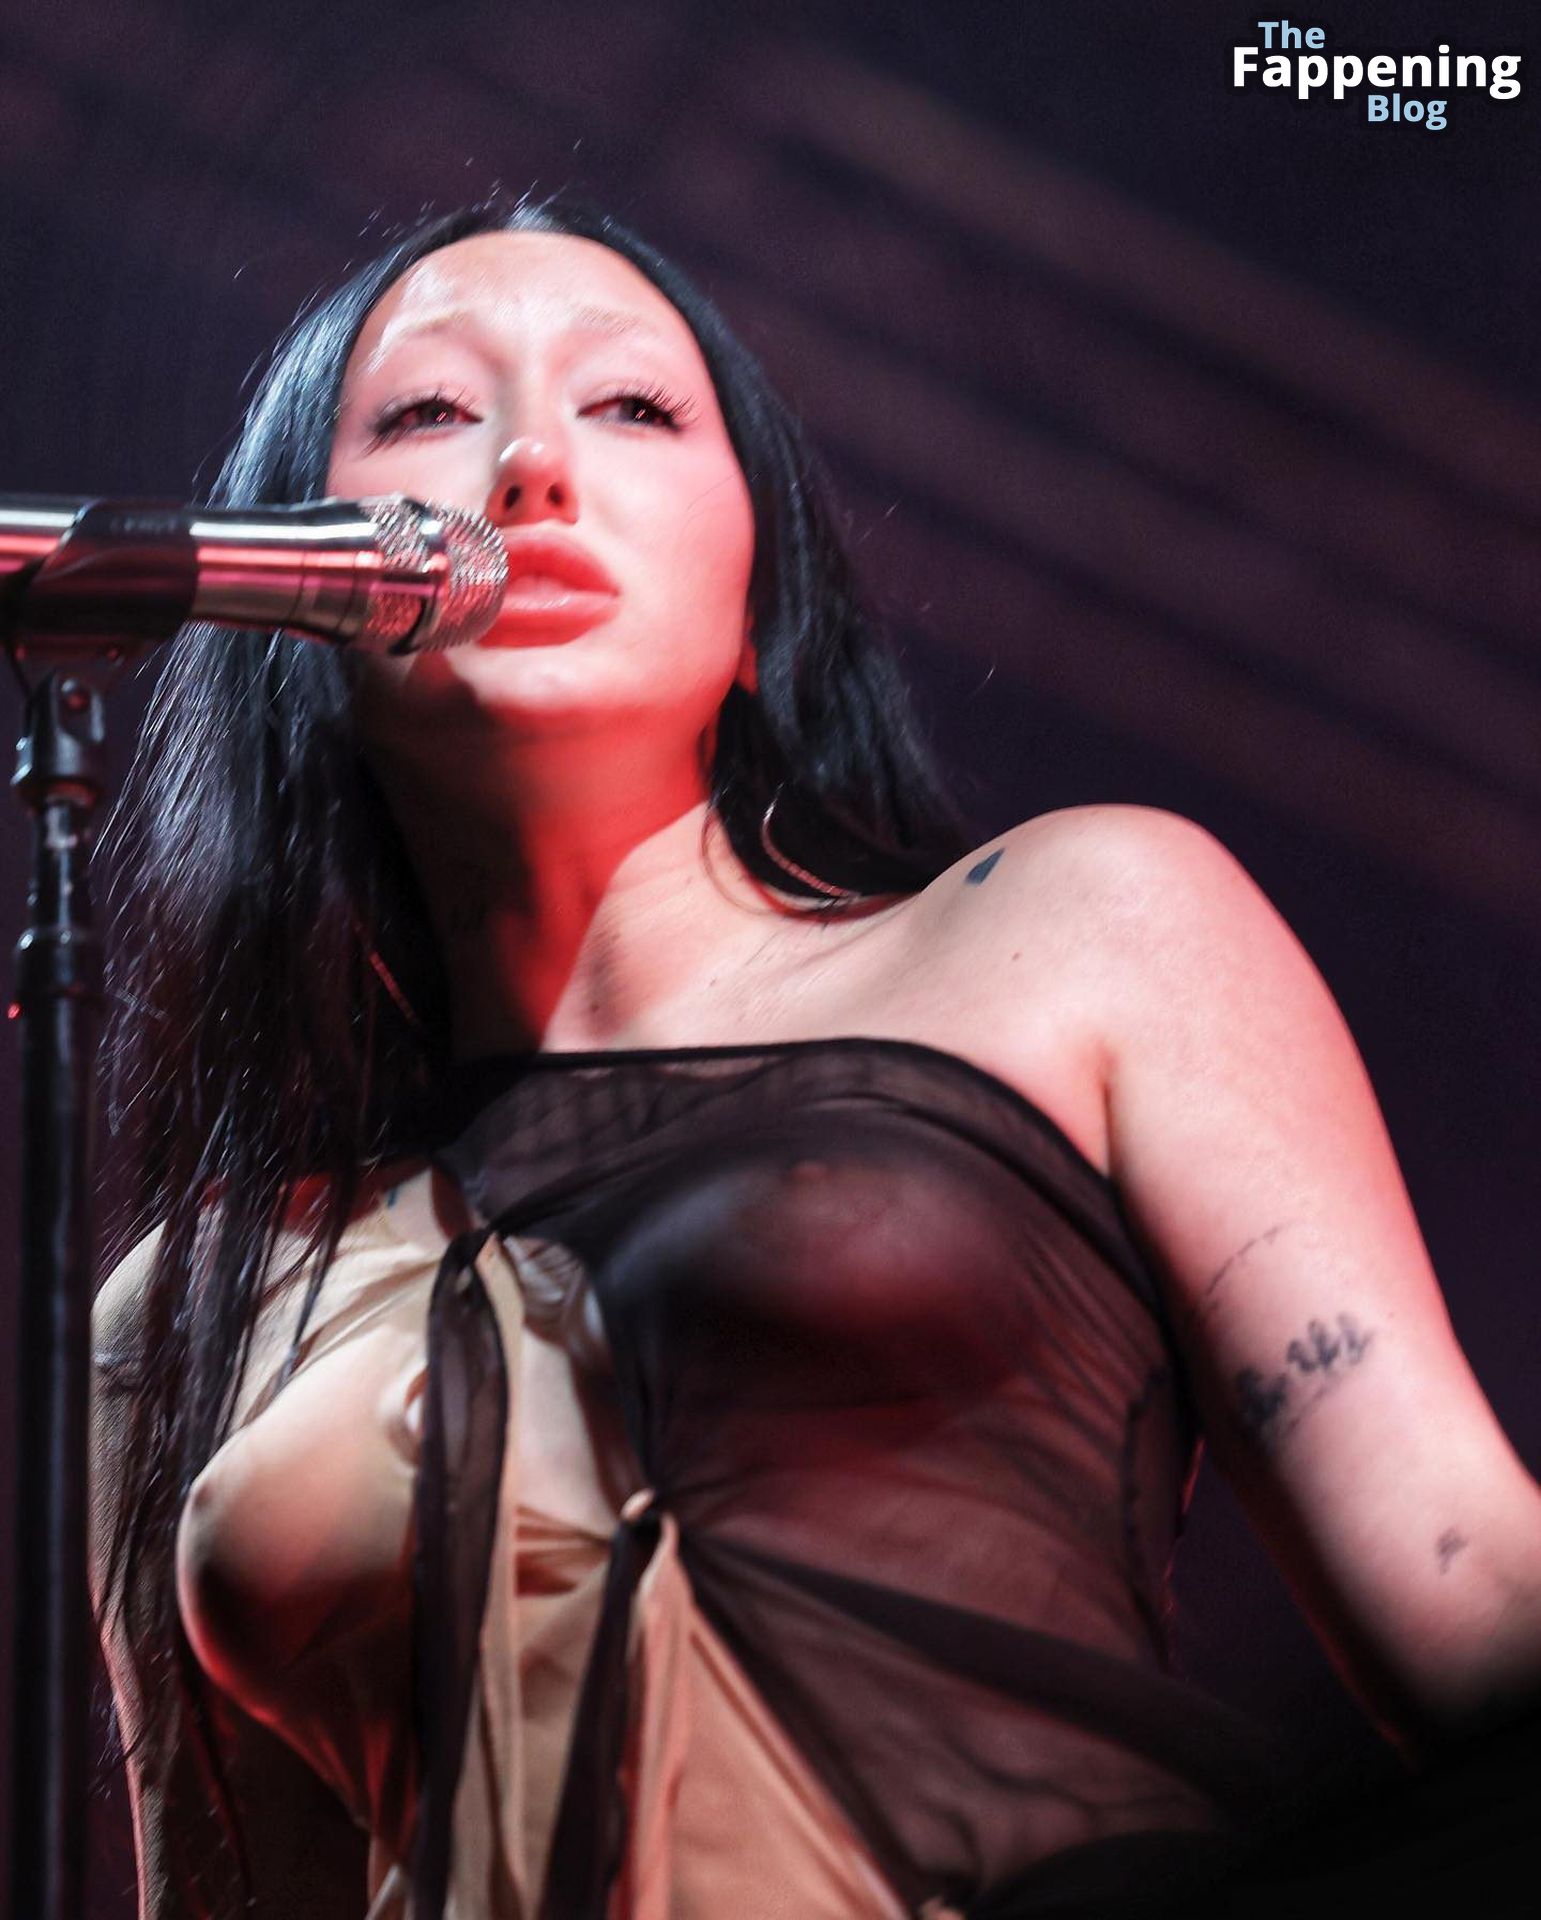 Noah Cyrus Displays Her Nude Boobs on Stage at the Splendour in the Grass Music Festival in Australia (15 Photos)